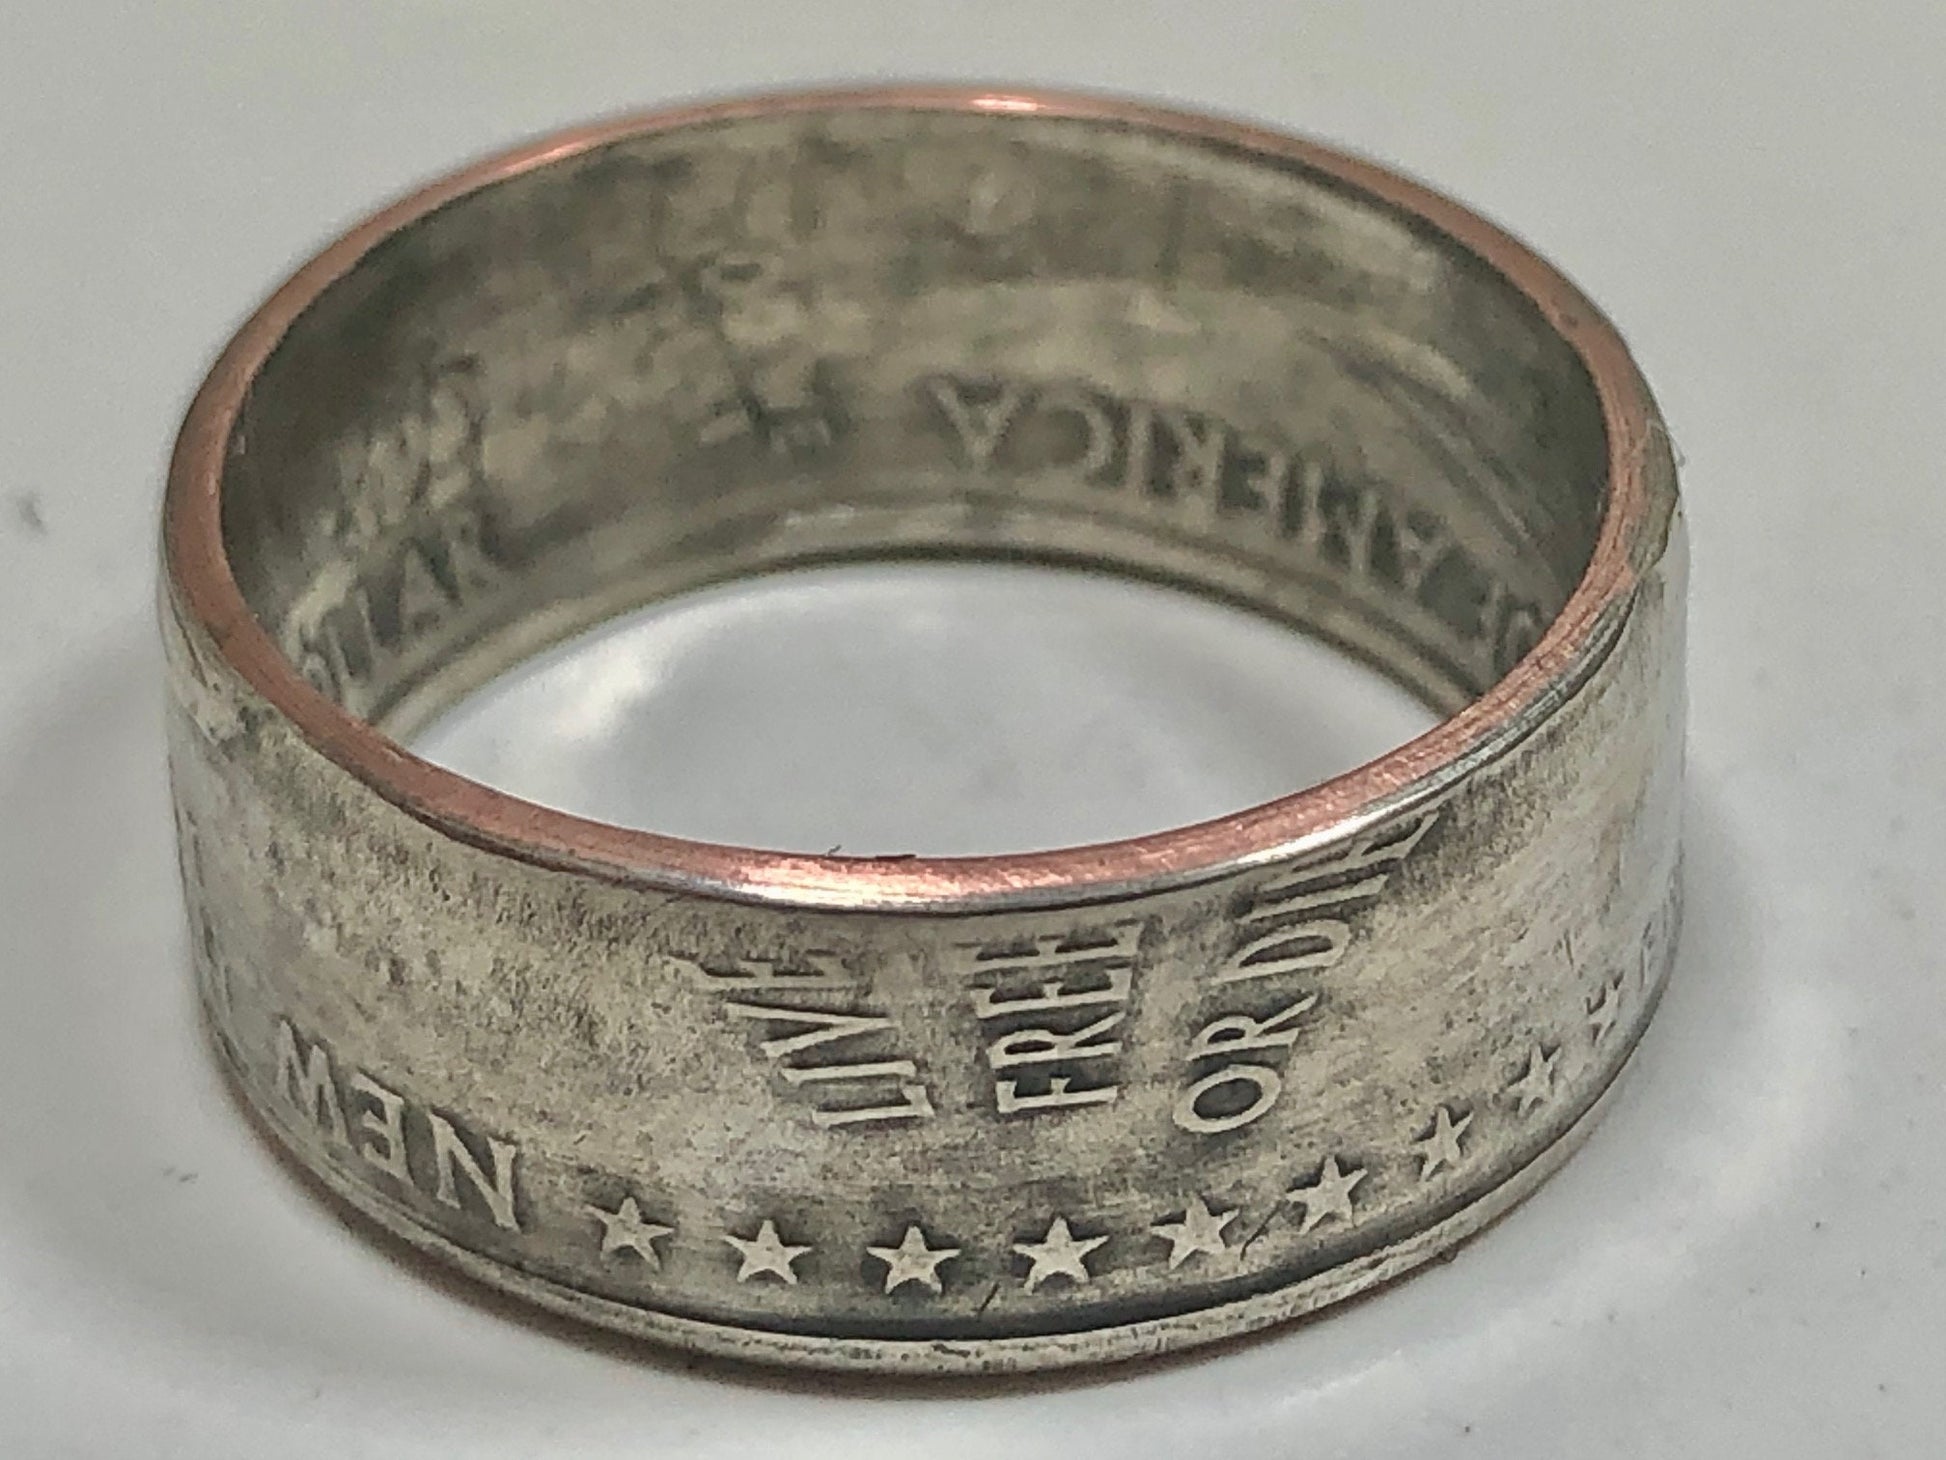 New Hampshire Ring State Quarter Coin Ring Hand Made